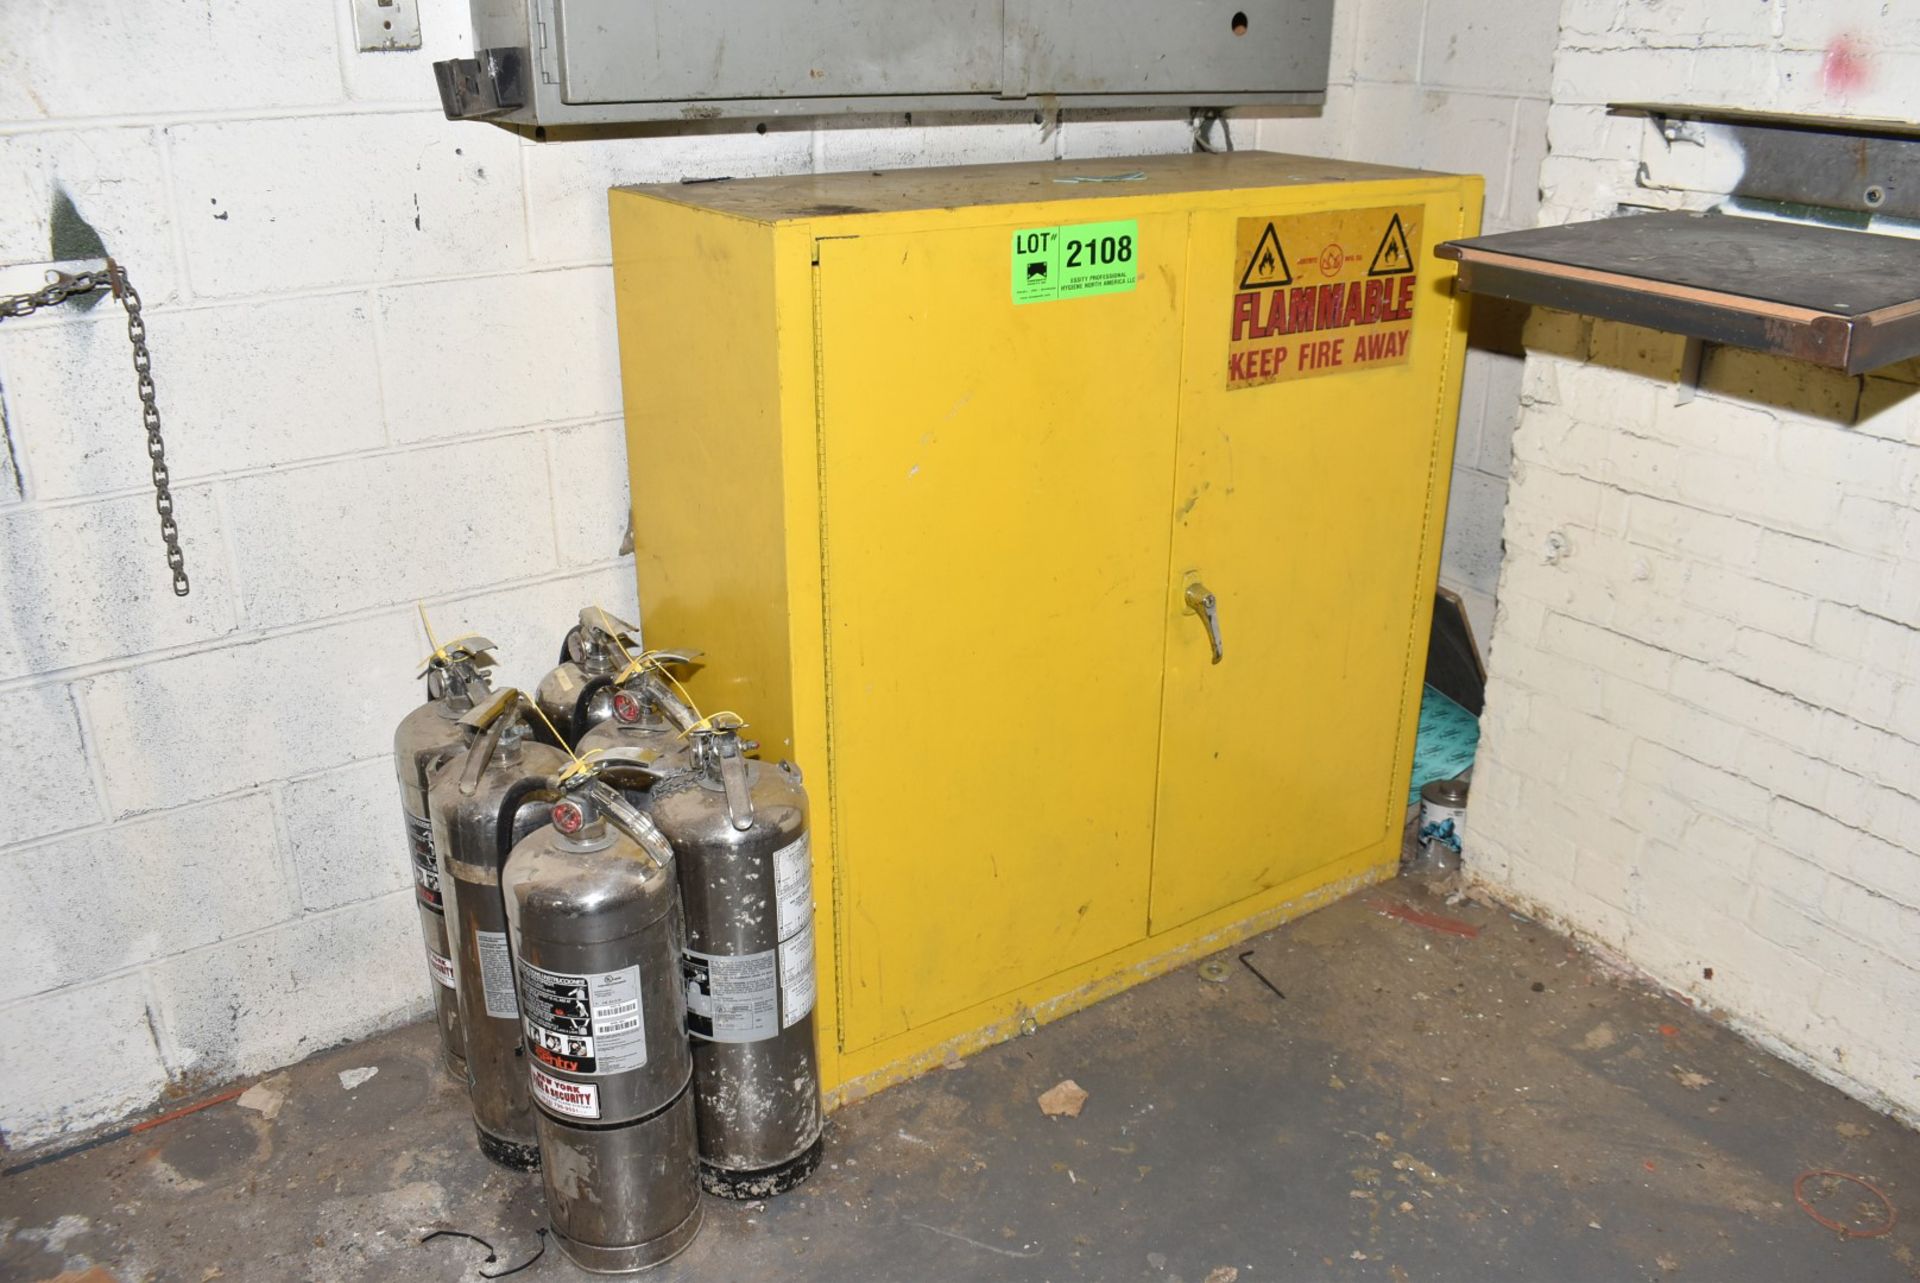 LOT/ 2 DOOR FLAMMABLE STORAGE CABINET [RIGGING FEES FOR LOT #2108 - $50 USD PLUS APPLICABLE TAXES]